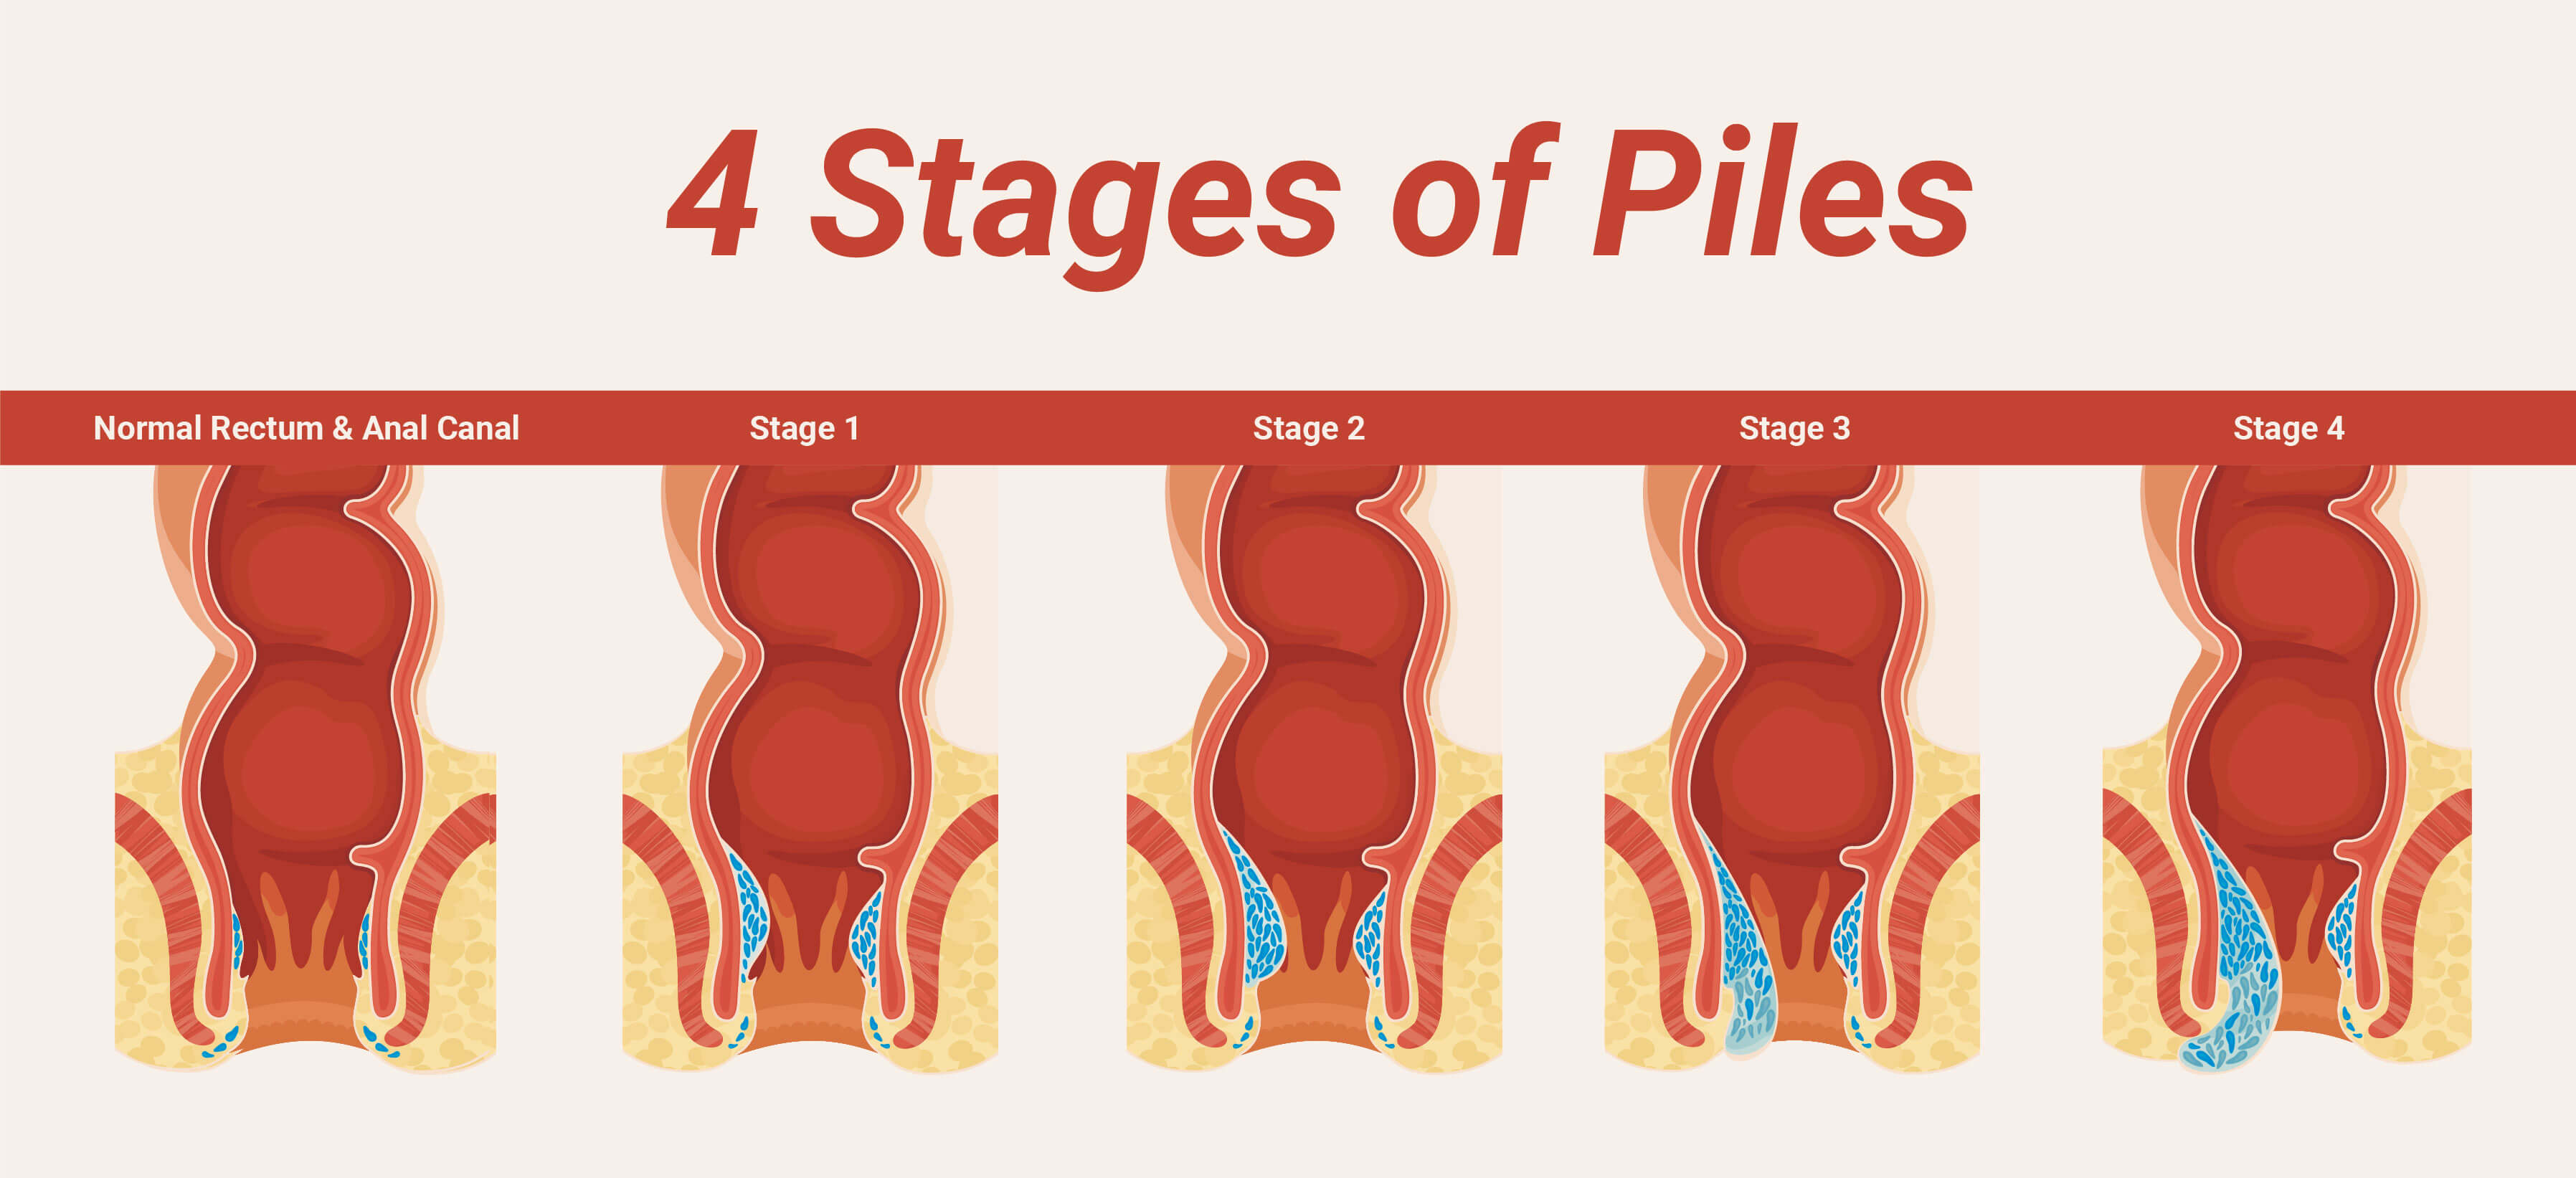 pictorial views of 4 stages of piles